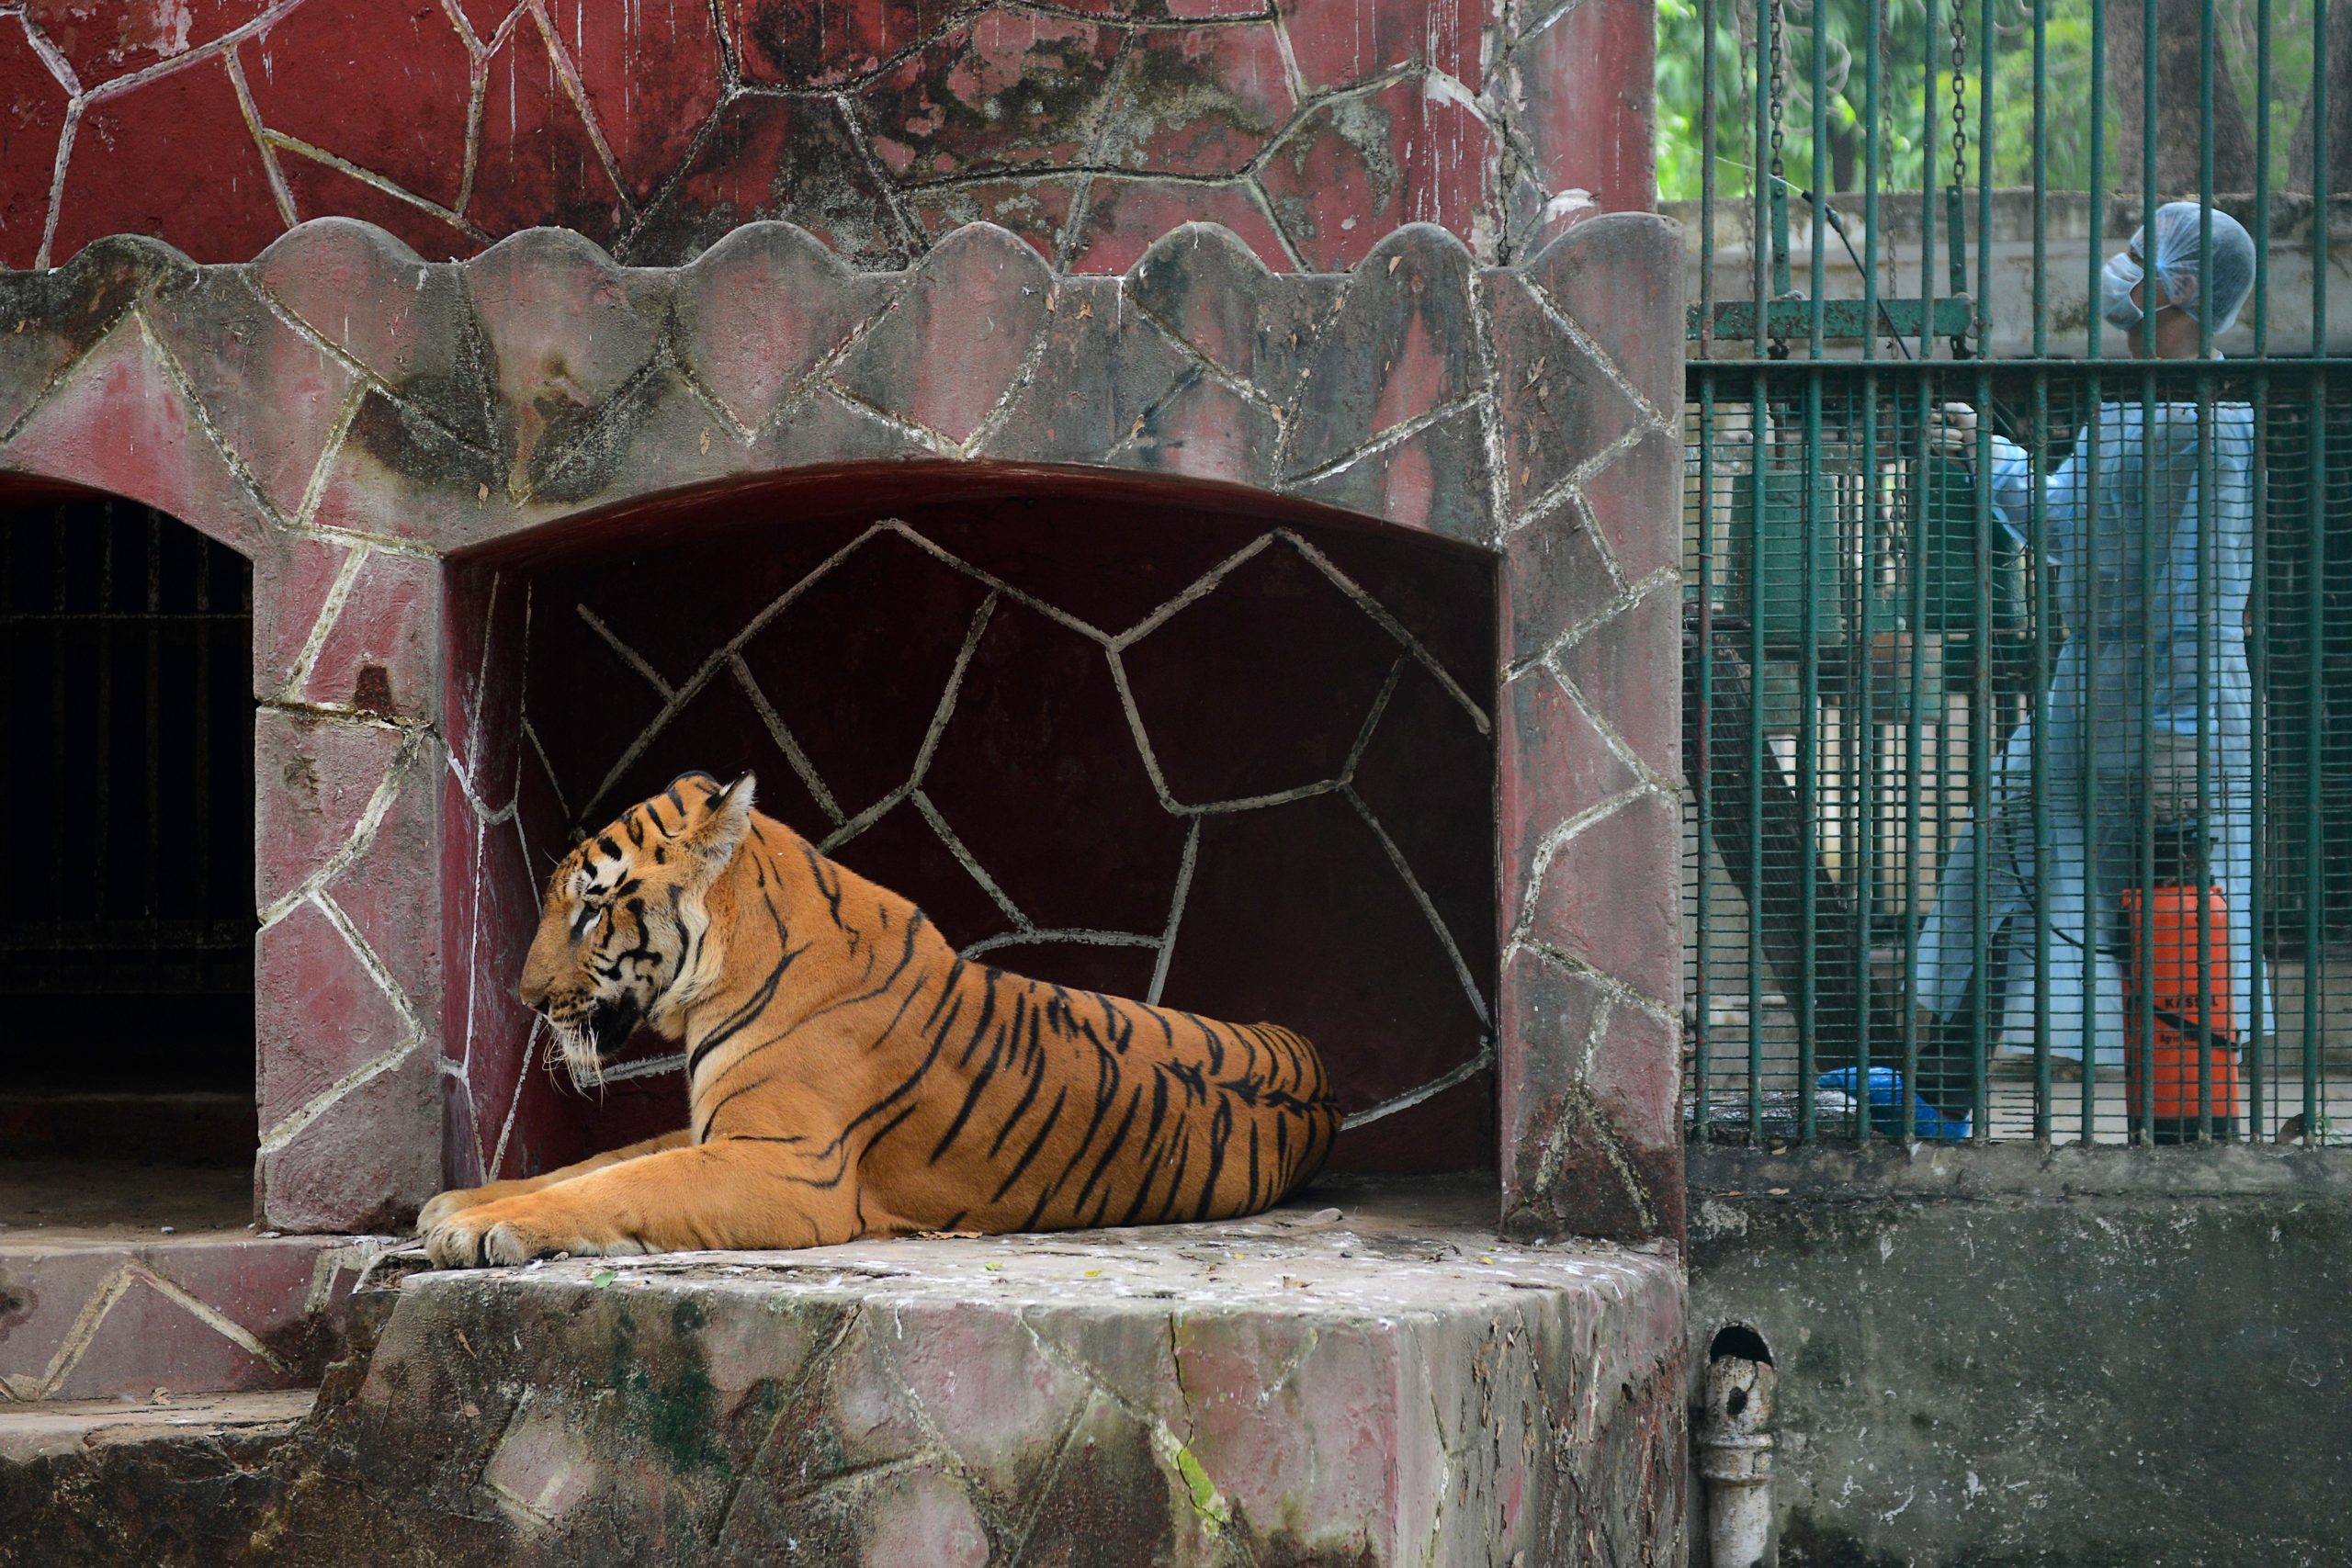 A Royal Bengal tiger rests as a health worker wearing Personal Protective Equipments (PPE) suit (R) sprays disinfectants at the Kamla Nehru Zoological Garden in Ahmedabad on September 11, 2020. (Photo by SAM PANTHAKY / AFP) (Photo by SAM PANTHAKY/AFP via Getty Images)